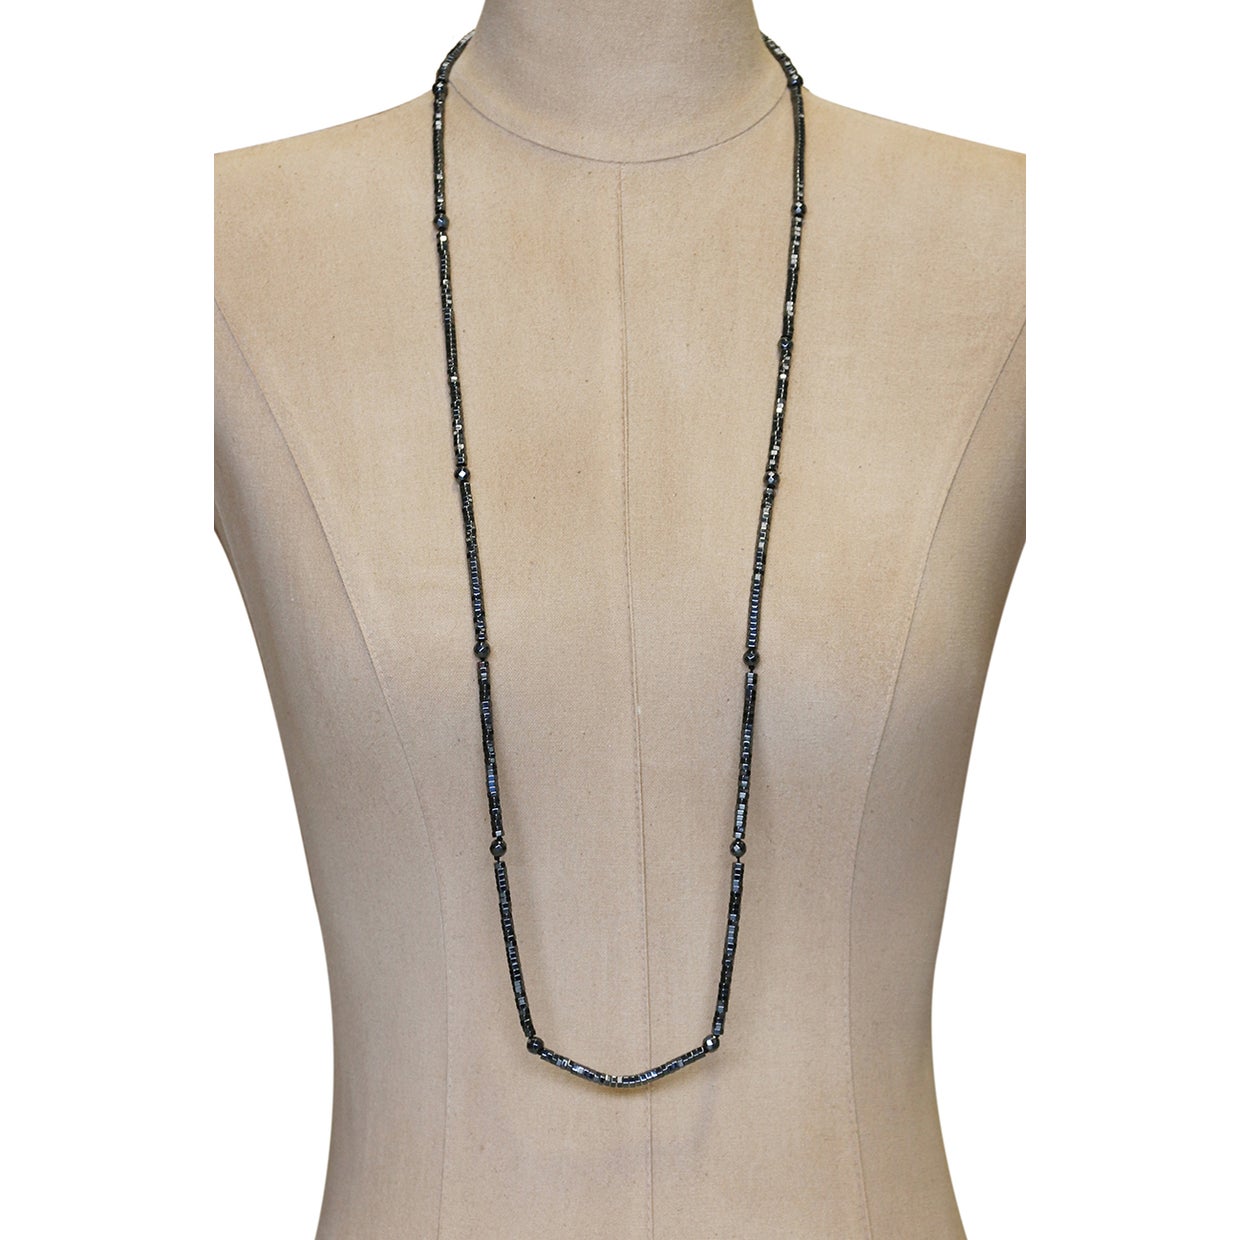 FACETED HERMATITE BEAD NECKLACE SPRING SPECIAL